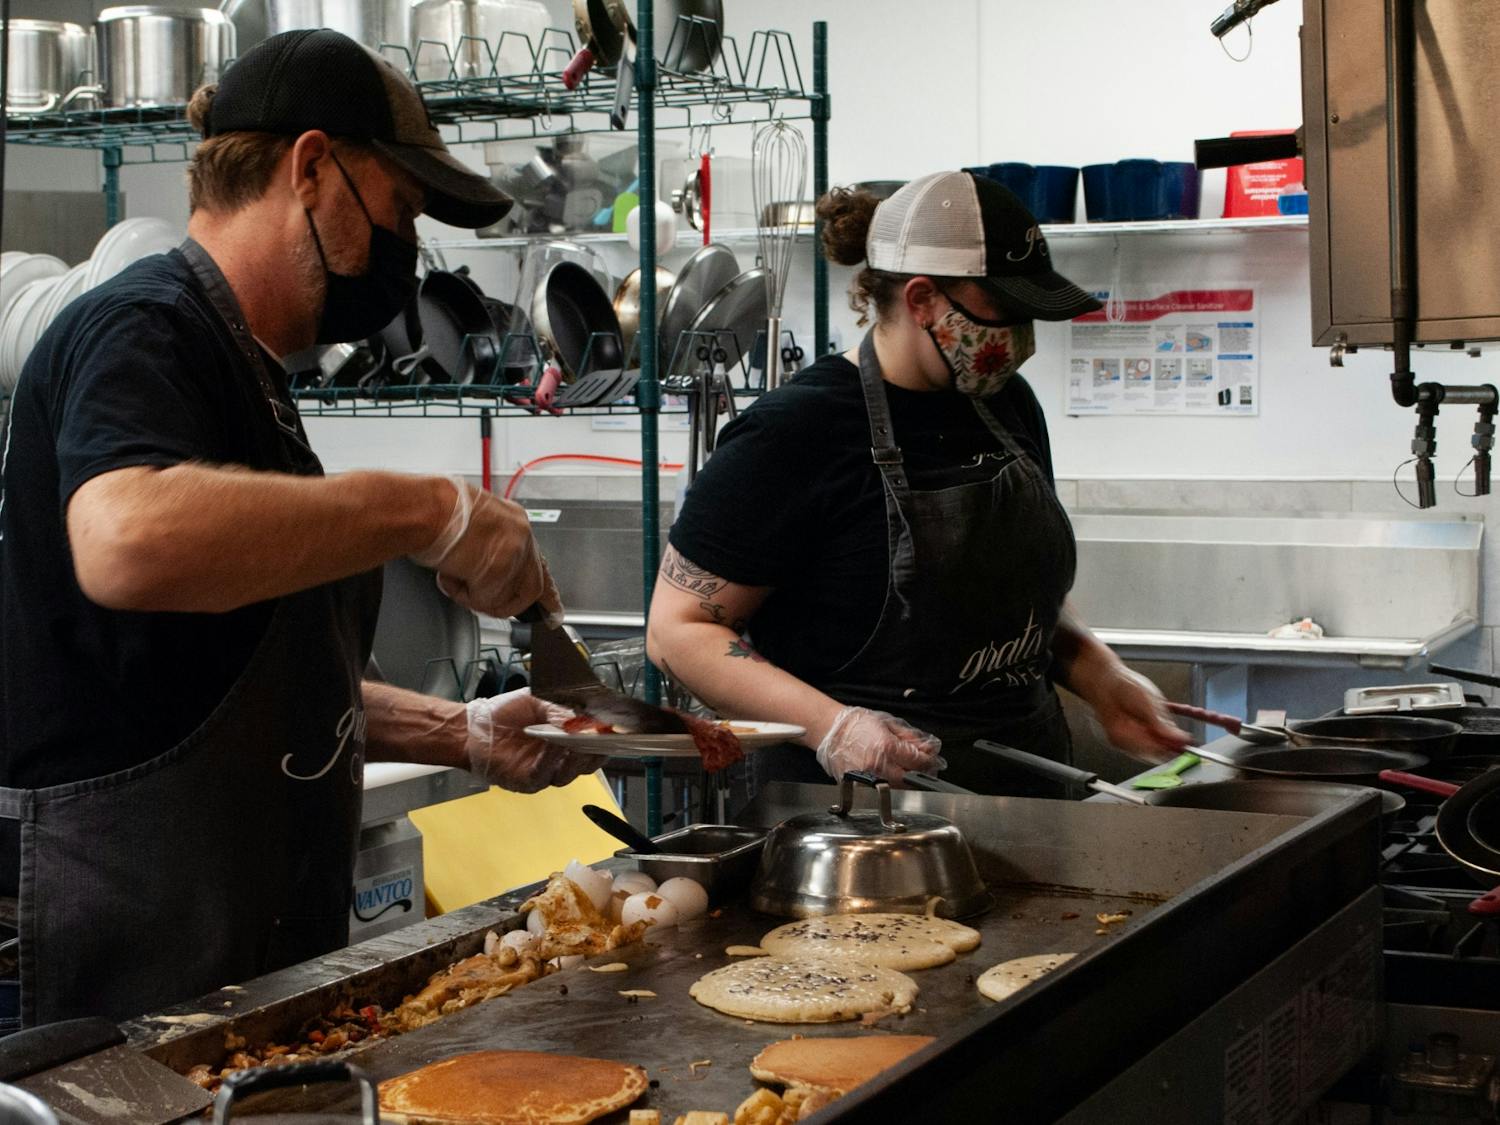 Chefs prepare food at the new Grata Cafe in Carrboro recently opened on Sunday, August 8th. Owner Jay Radford says that "the staff are amazing and the food... the food is just great."